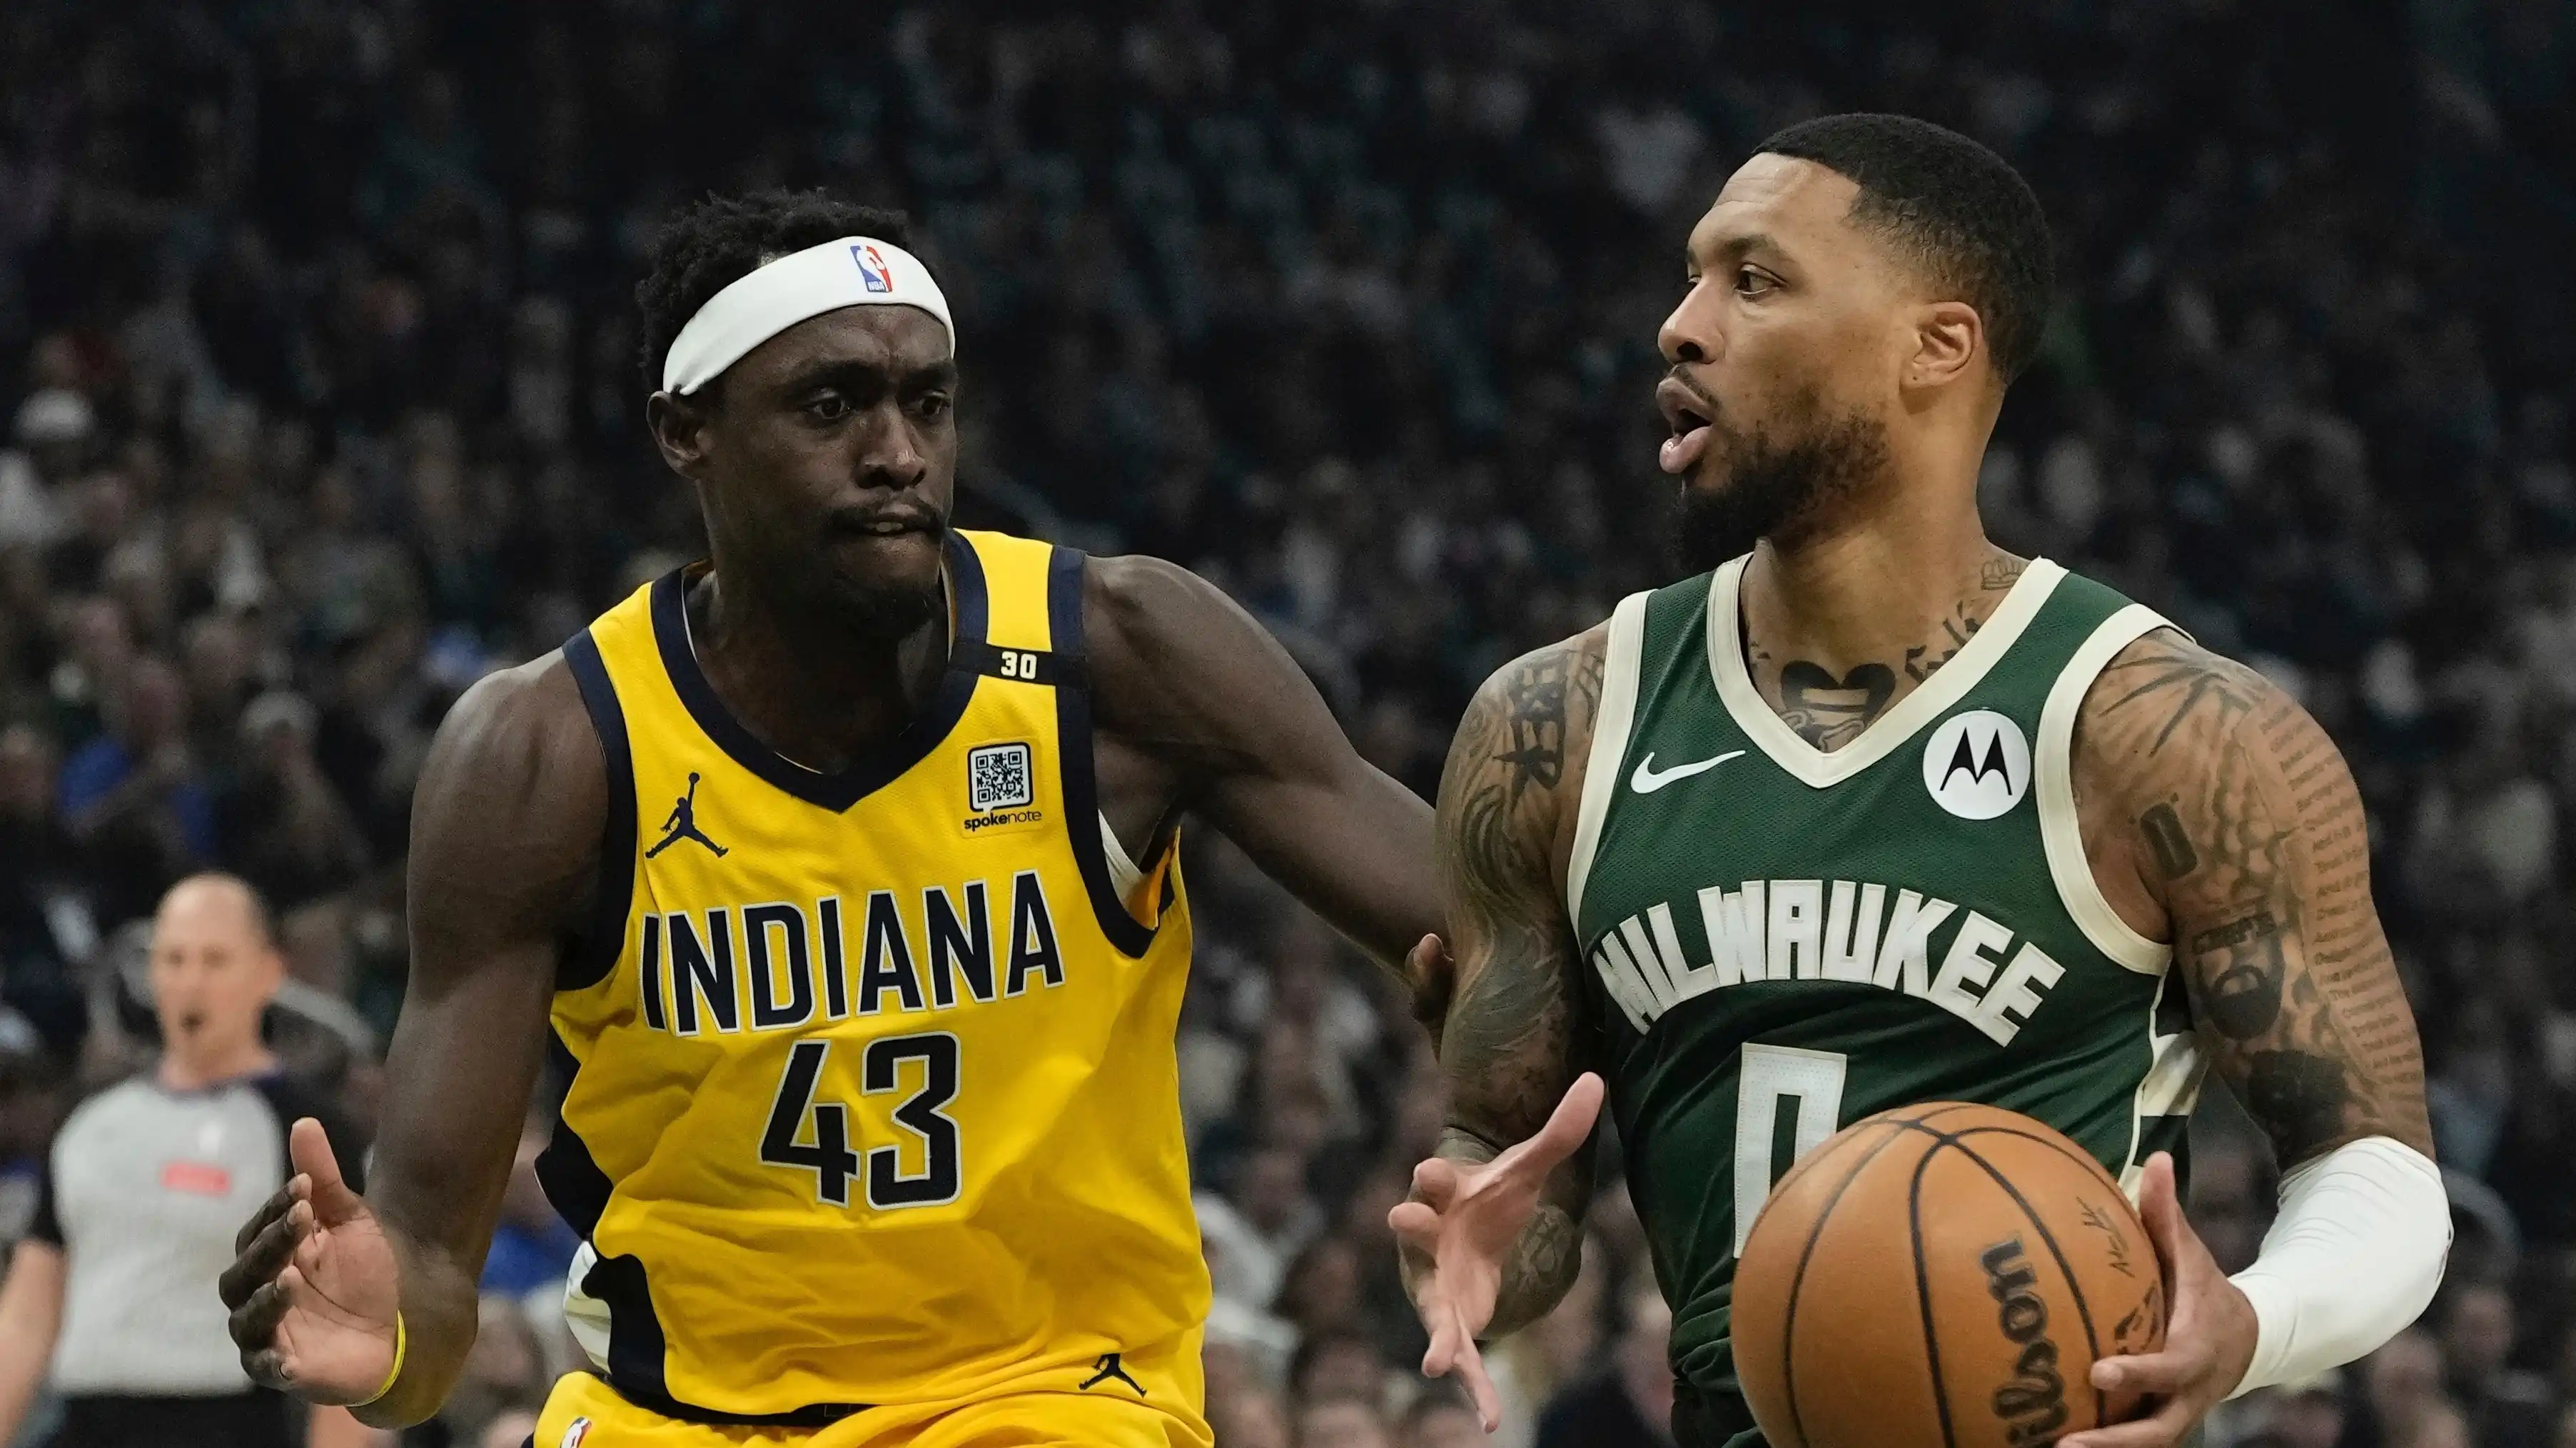 Pascal Siakam scores 37 to help Indiana Pacers square series with Milwaukee Bucks